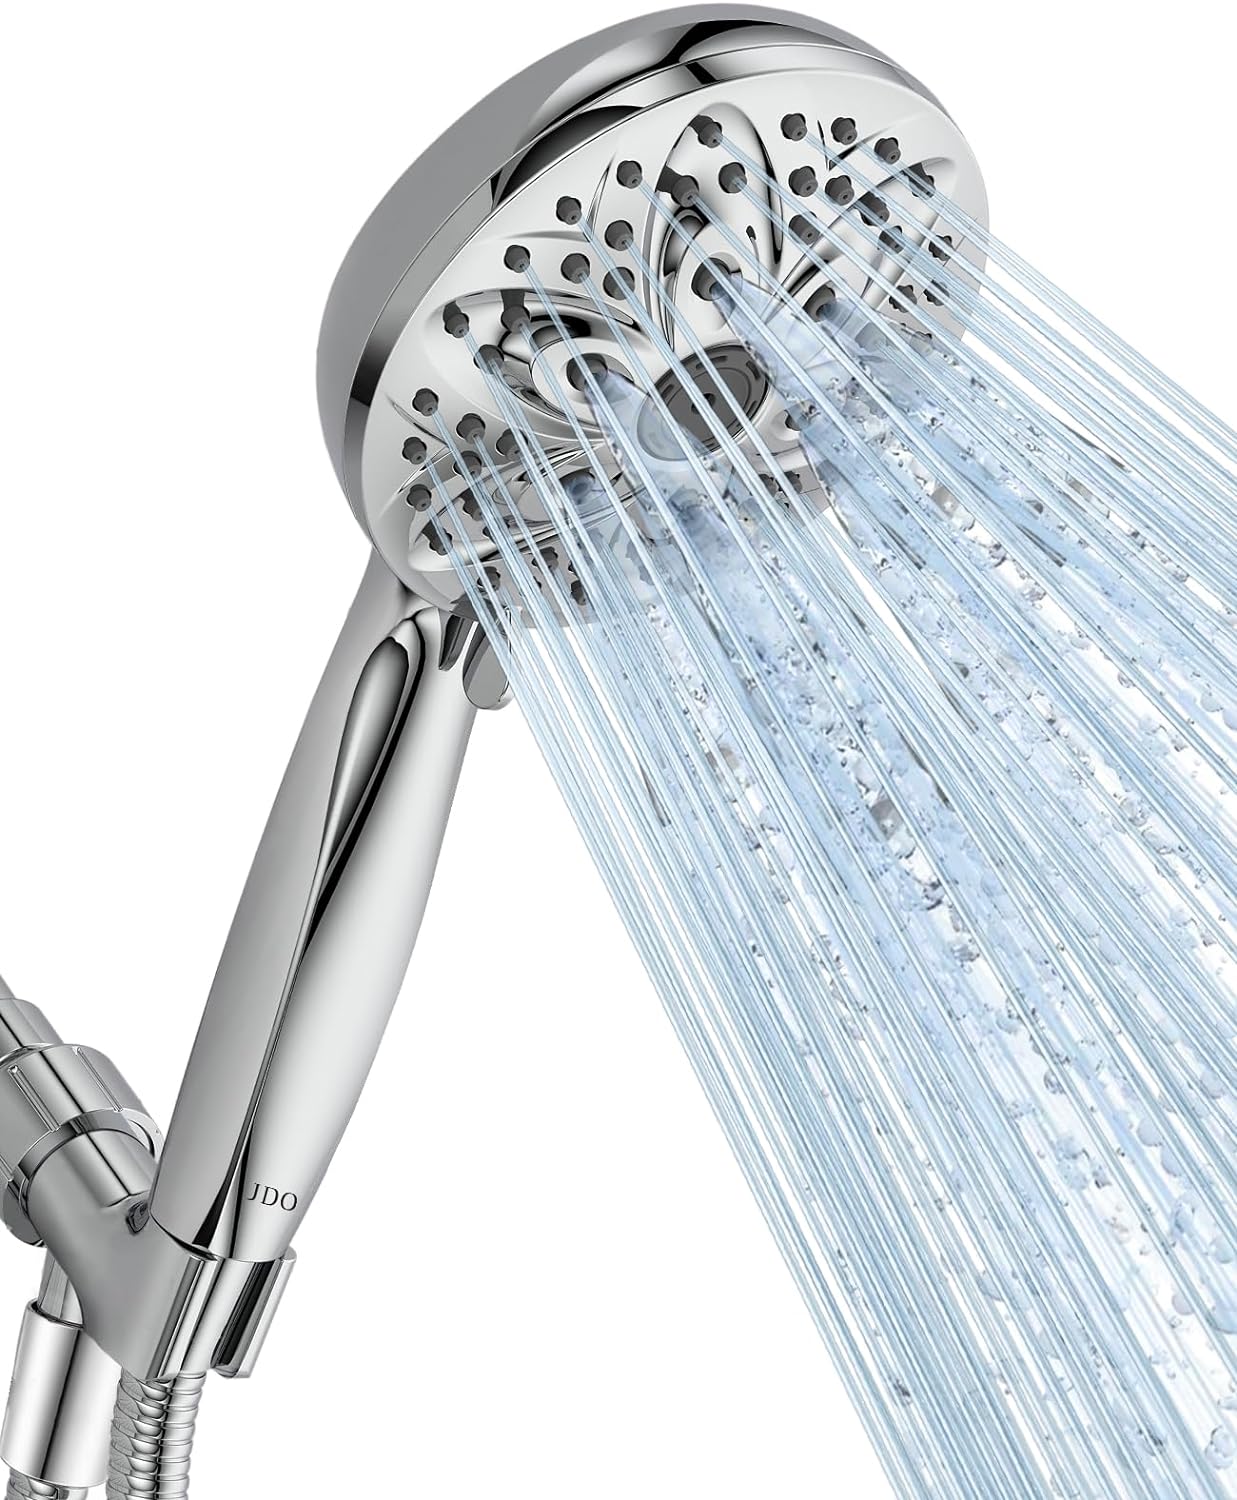 Shower Head with Handheld, High Pressure Handheld Shower Head 6 Settings, Detachable Shower Head Set with Stainless Steel Hose and Shower Bracket (Chrome)